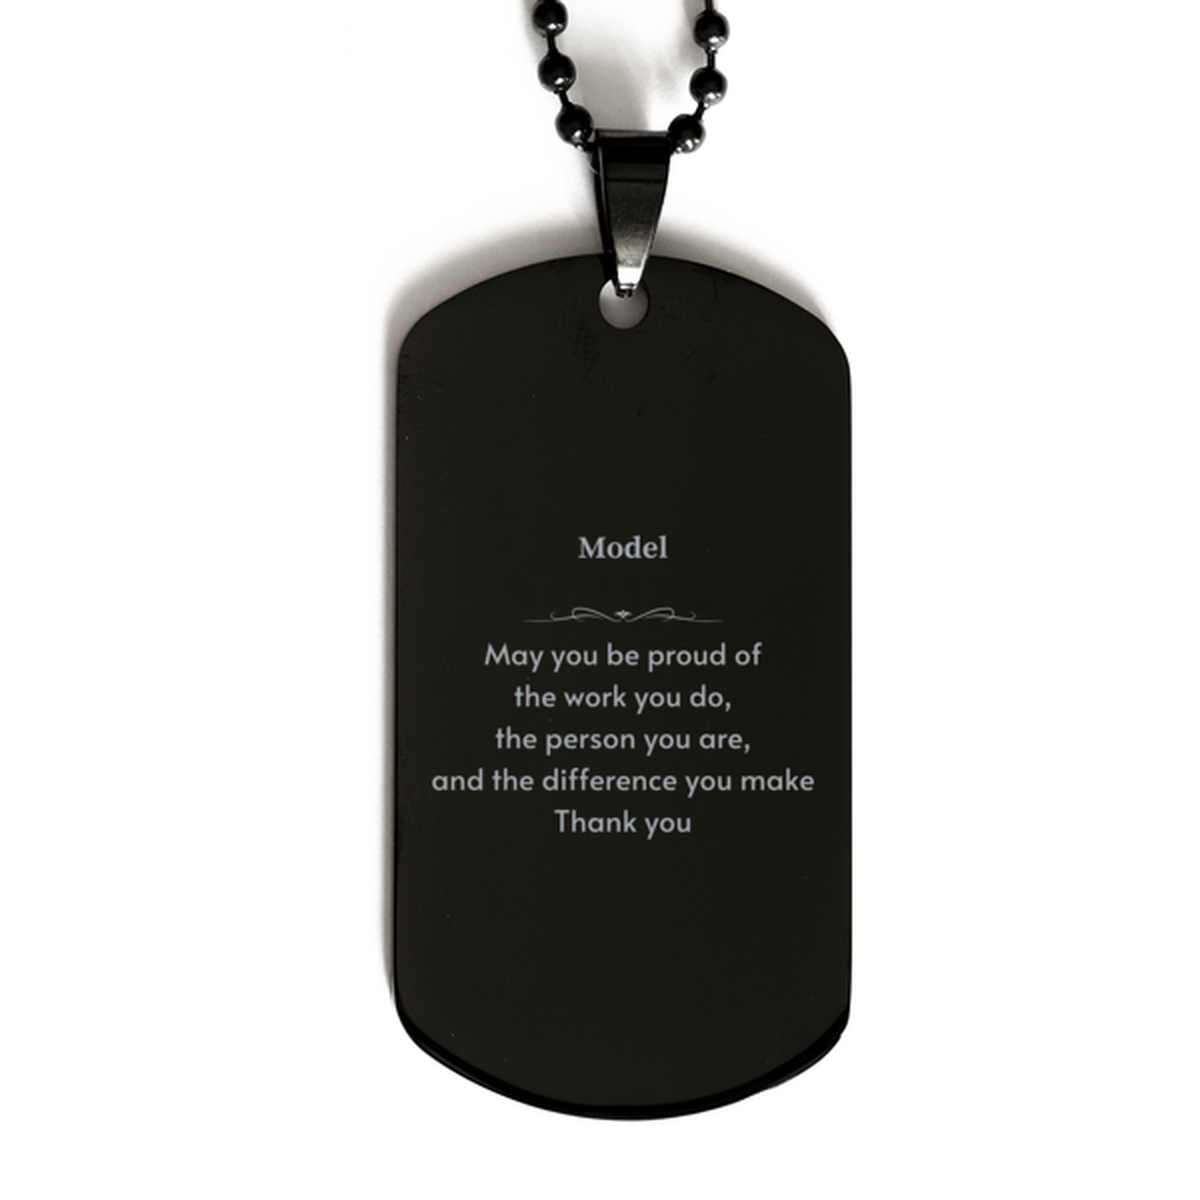 Heartwarming Black Dog Tag Retirement Coworkers Gifts for Model, Model May You be proud of the work you do, the person you are Gifts for Boss Men Women Friends